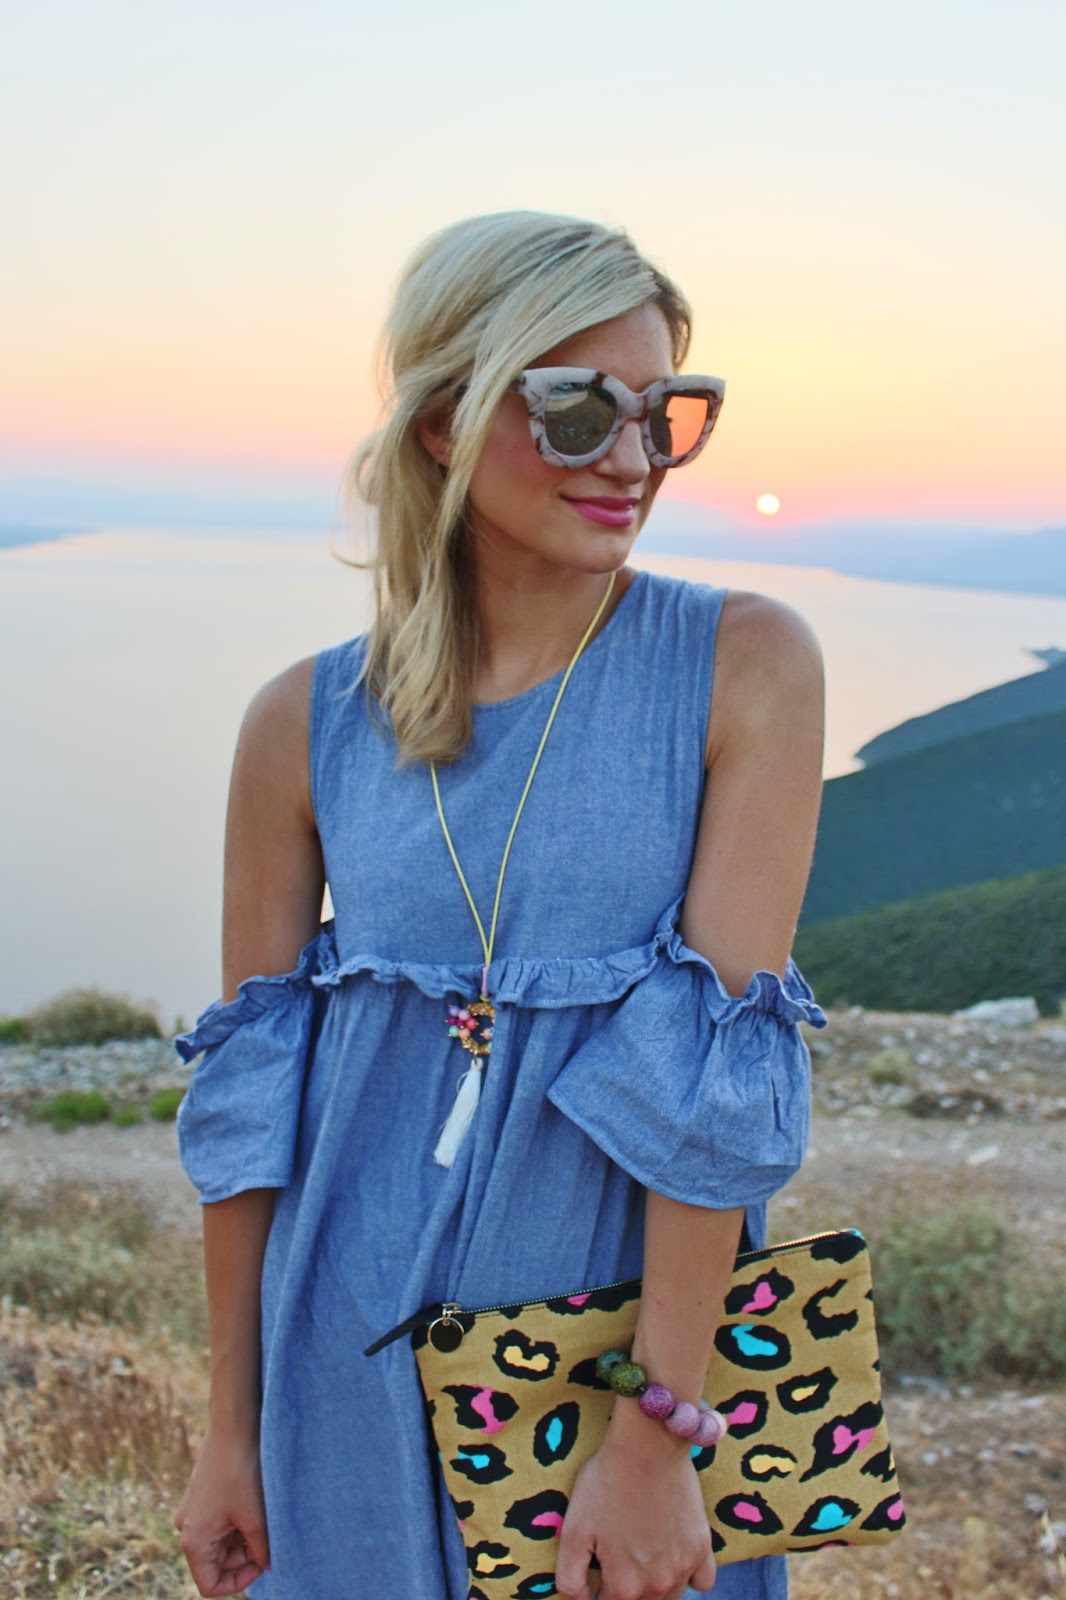 bijuleni- Boohoo off the shoulder dress with sneakers. Sunset in Greece. 